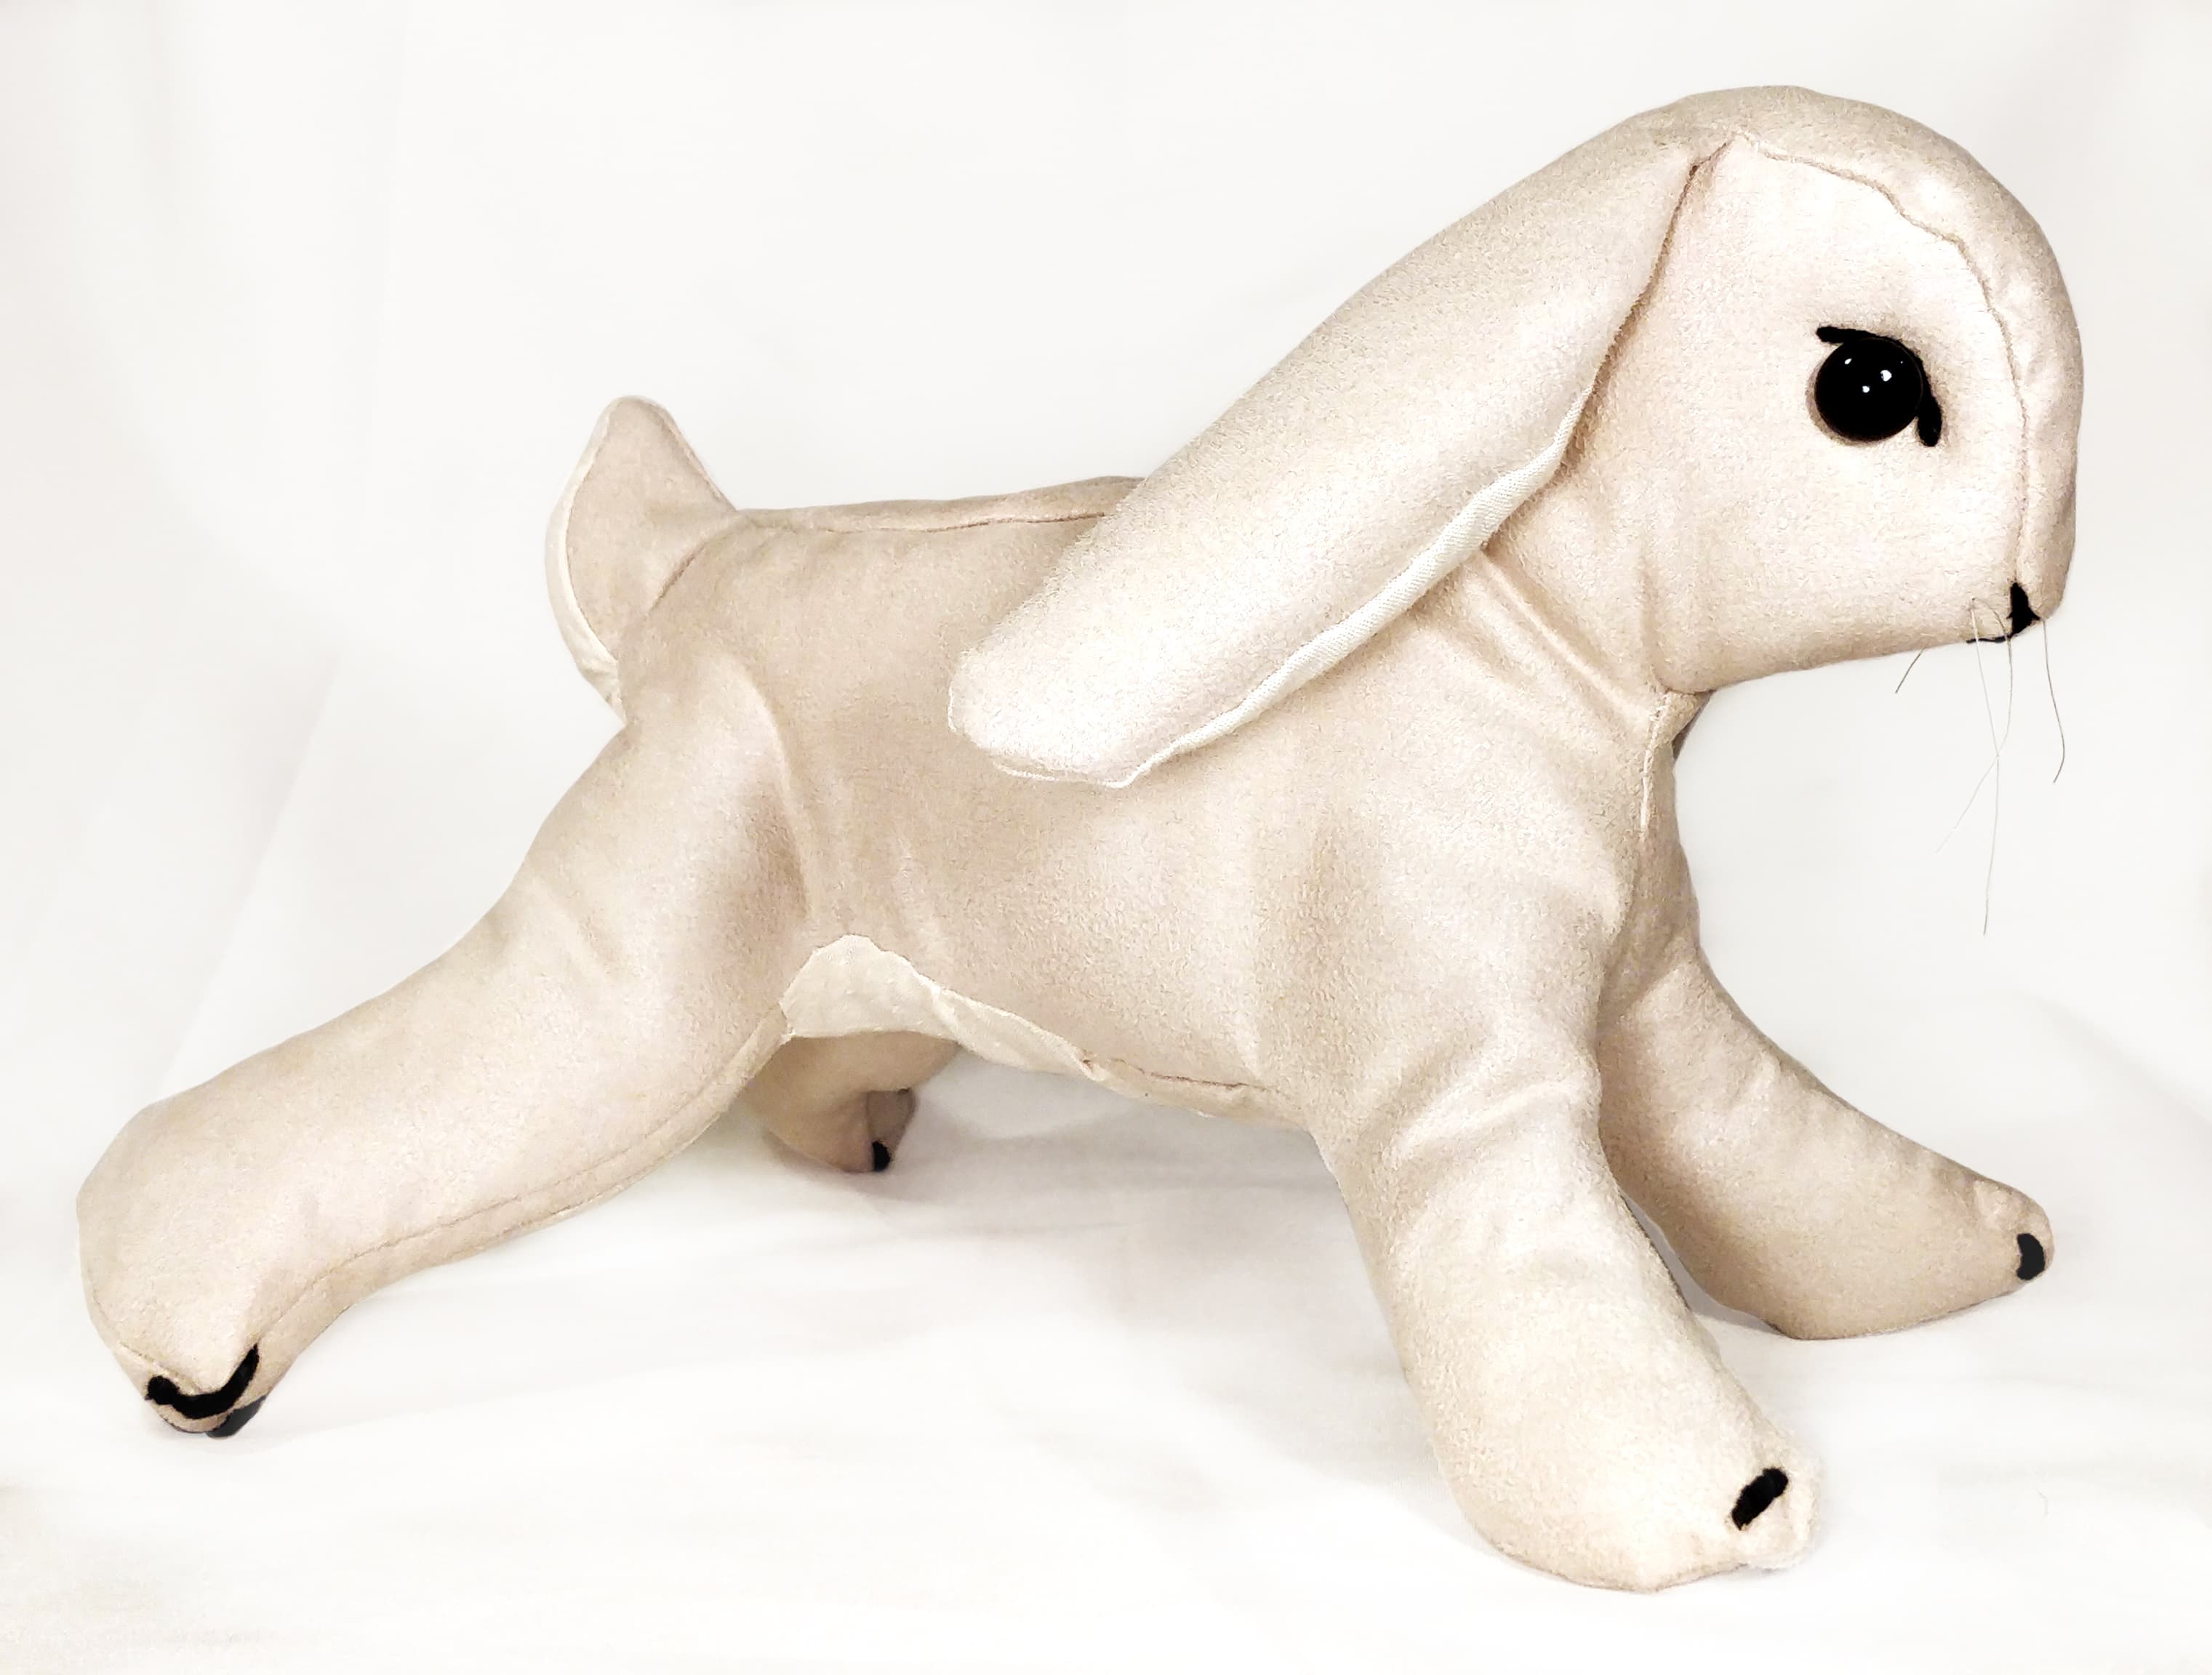 A soft toy rabbit standing